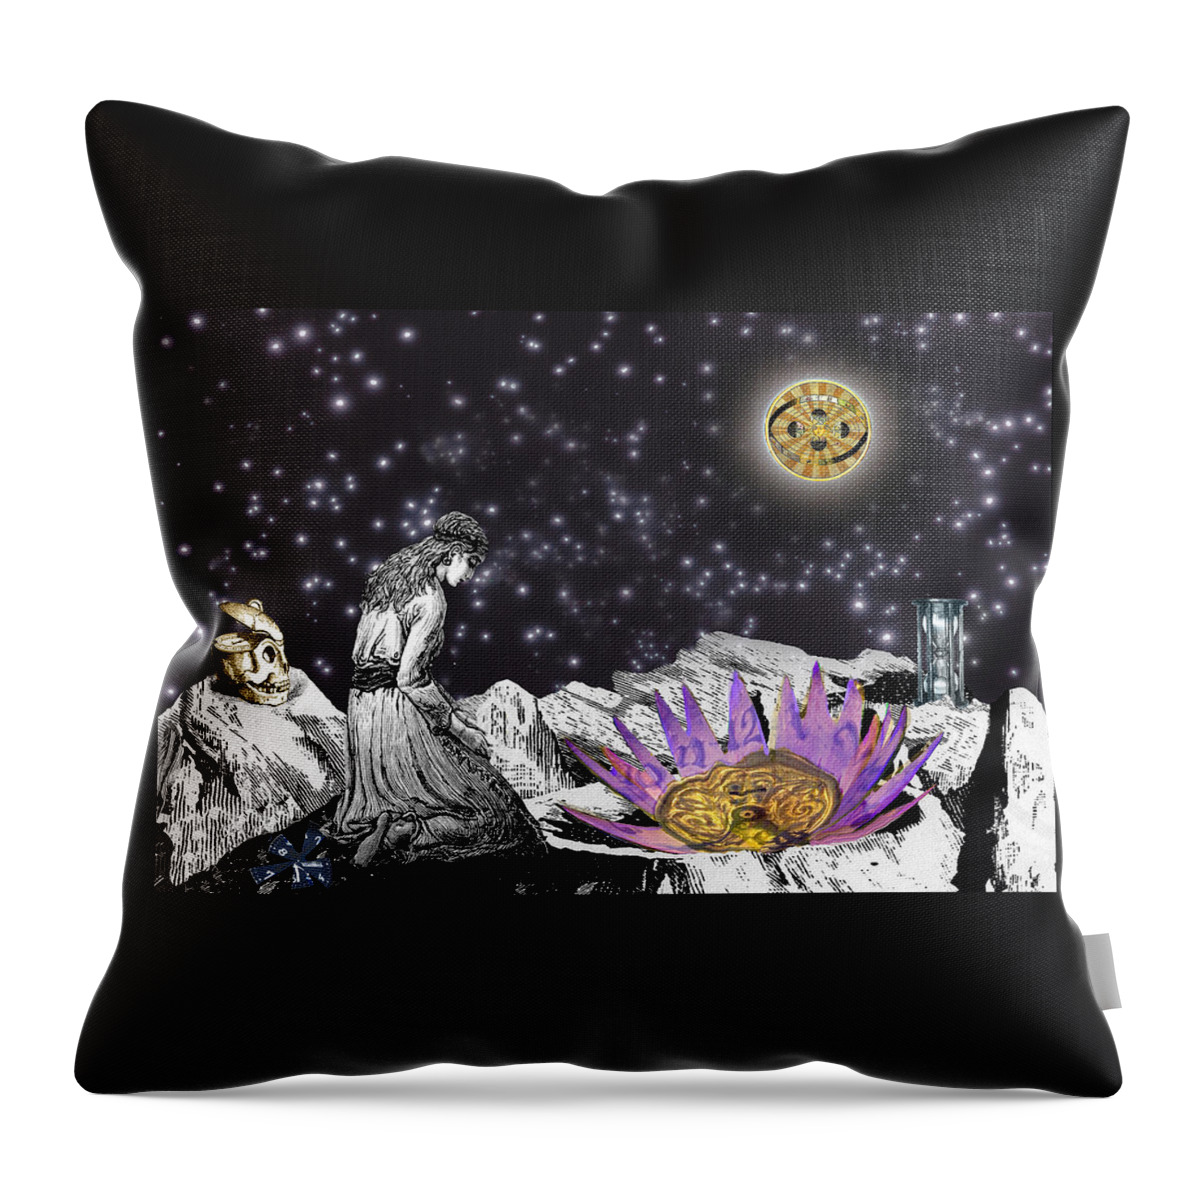 Young Woman Throw Pillow featuring the digital art The Clock's Petals Open by Lisa Yount